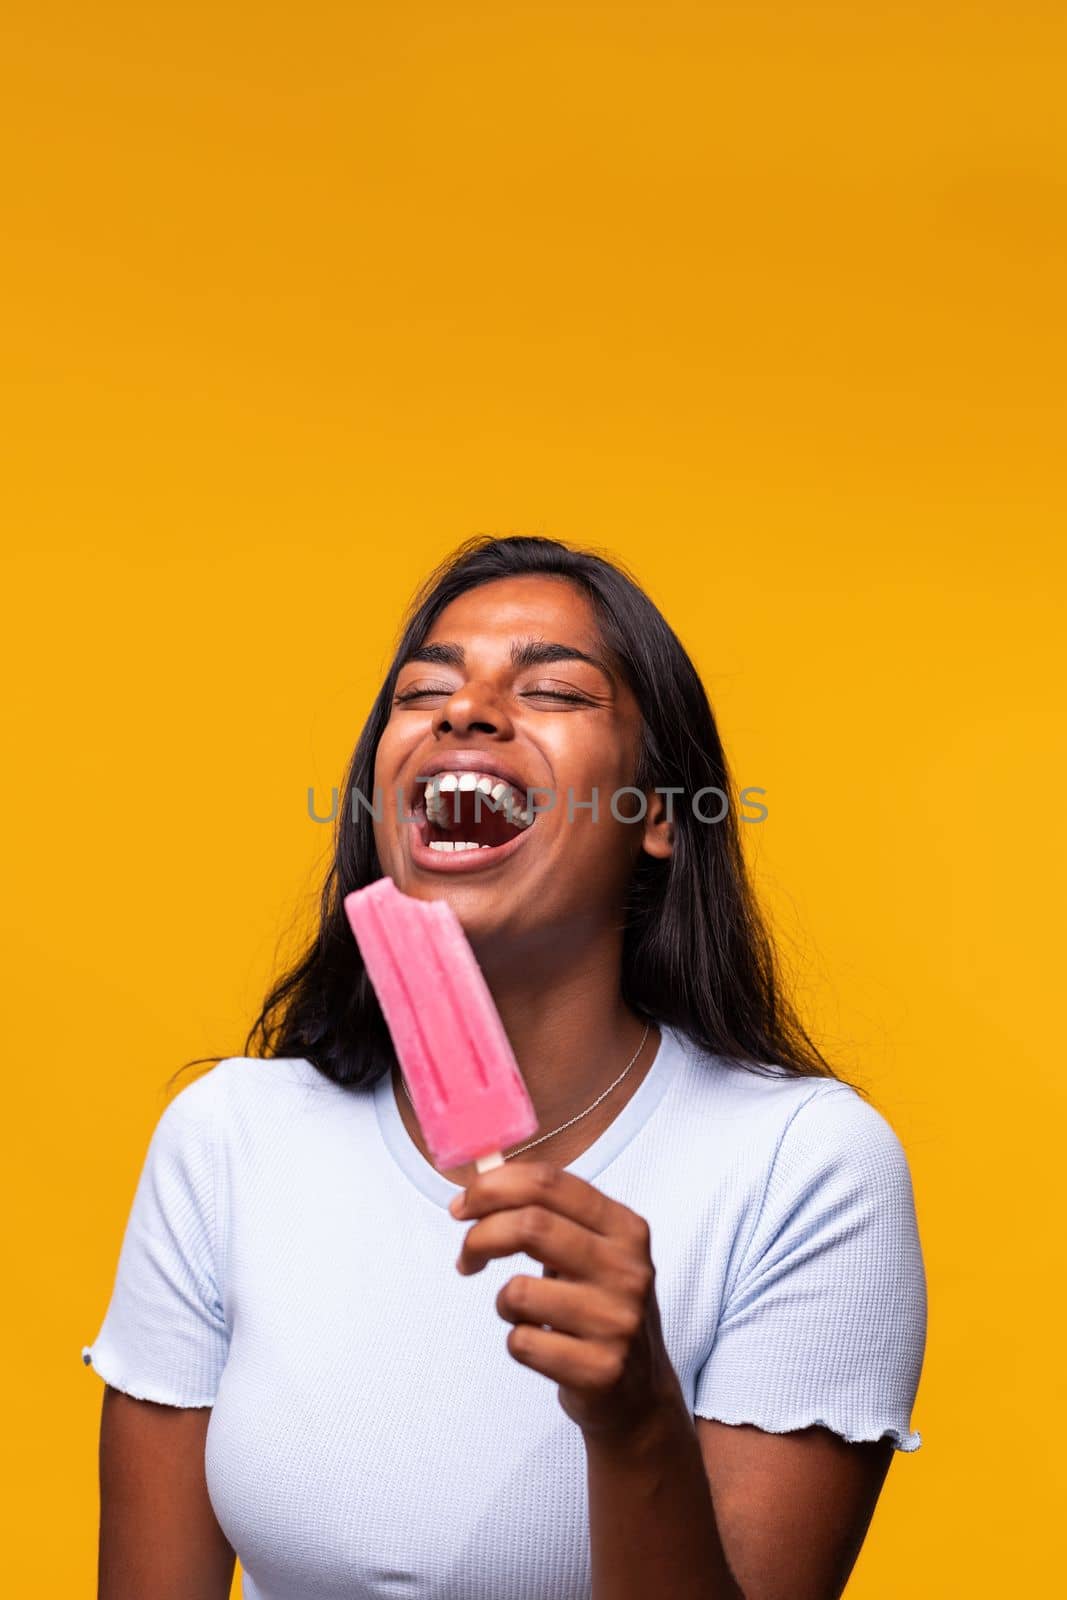 Vertical portrait of young Indian woman laughing eating pink popsicle on yellow background. Asian woman eating ice cream. Studio shot.